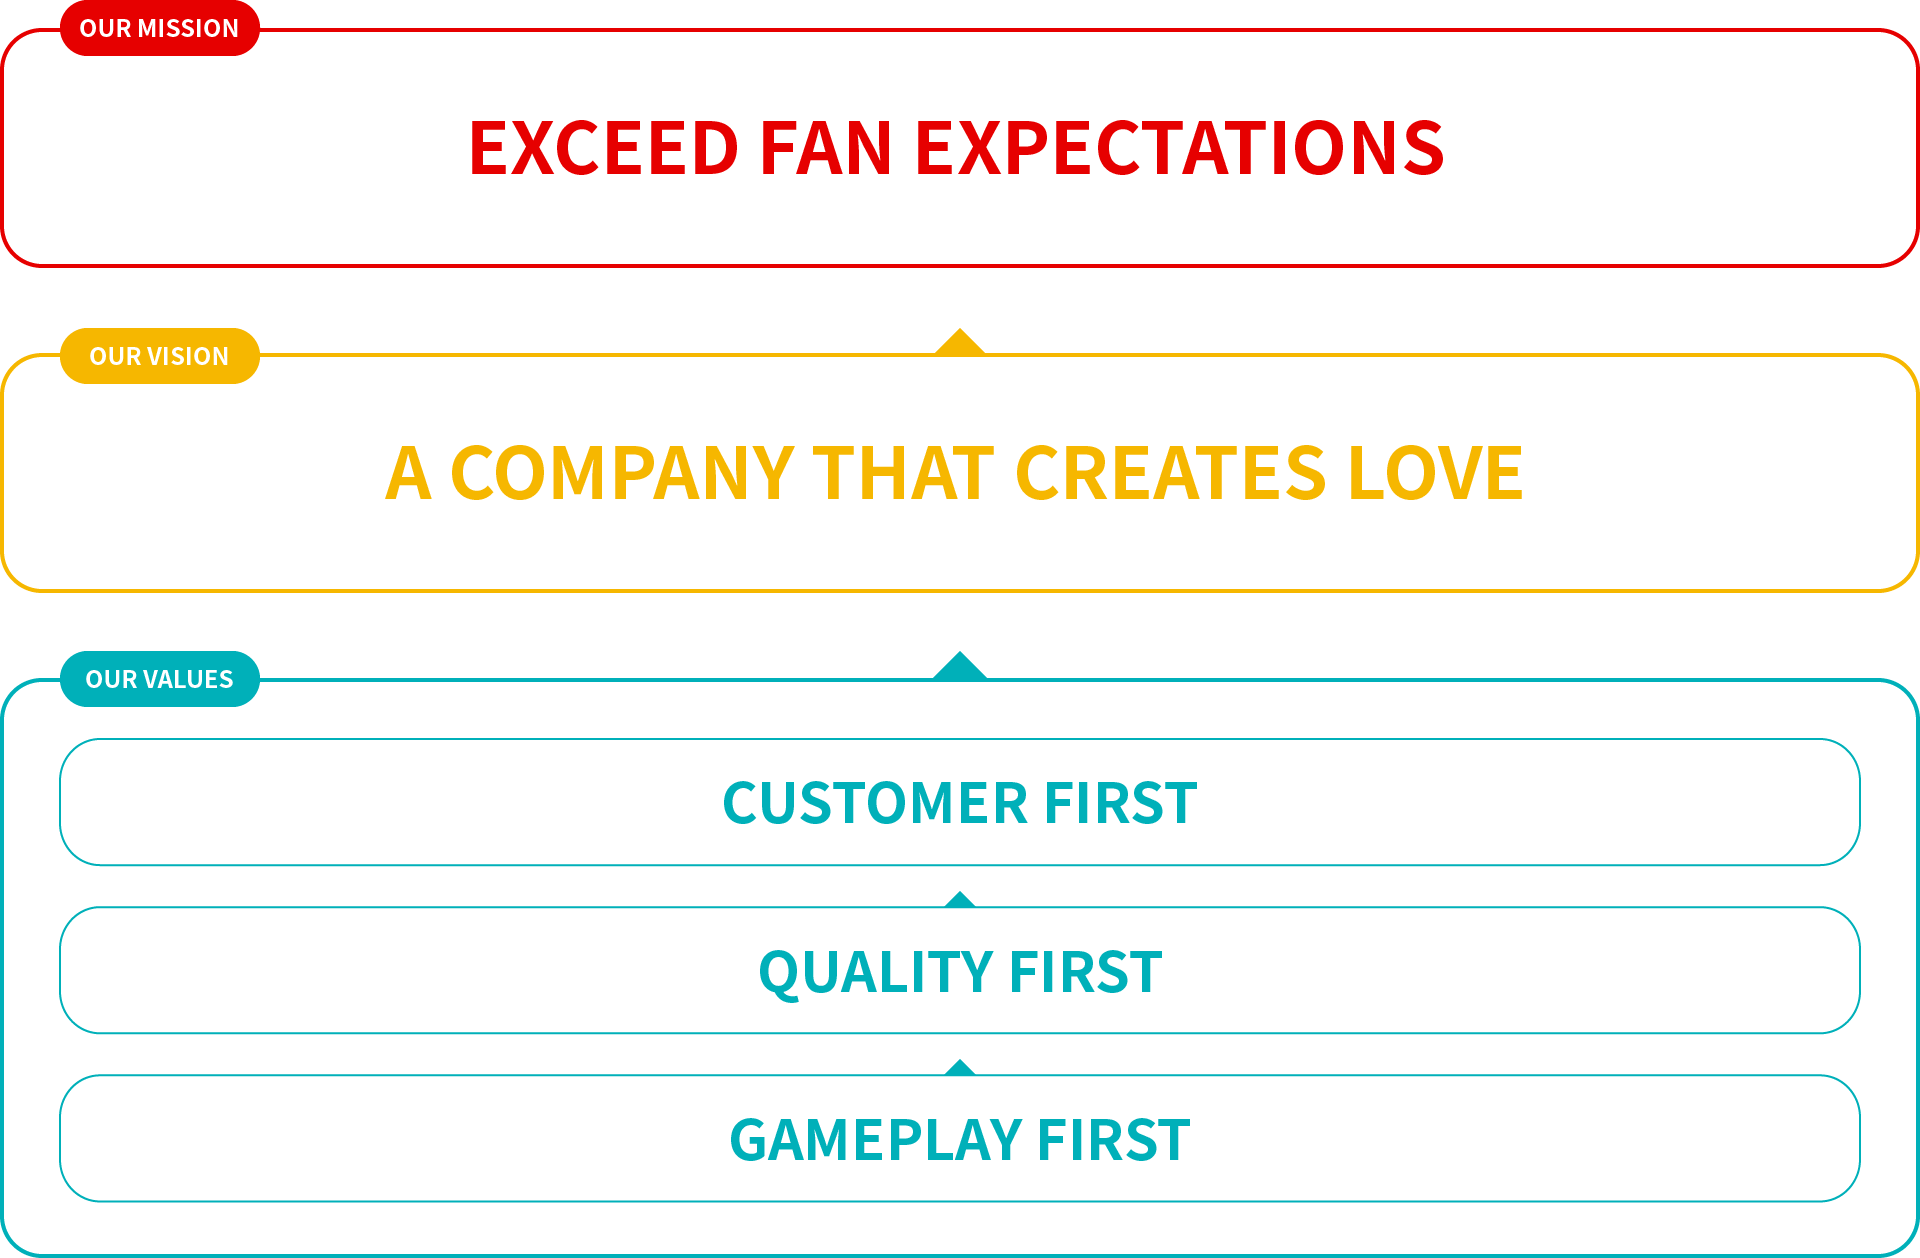 OUR MISSION: EXCEED FAN EXPECTATIONS < OUR VISION: A COMPANY THAT CREATES LOVE < OUR VALUES: CUSTOMER FIRST < QUALITY FIRST < GAMEPLAY FIRST